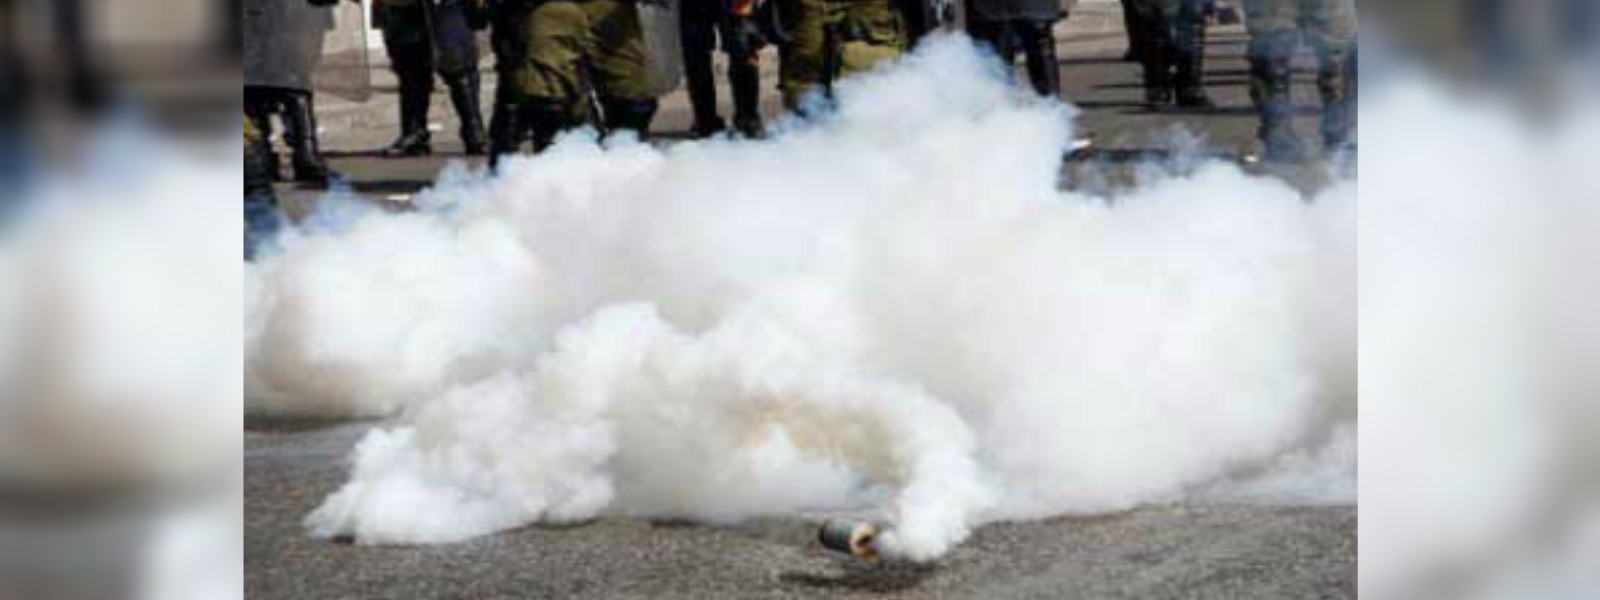 Police fire tear gas at protesting students